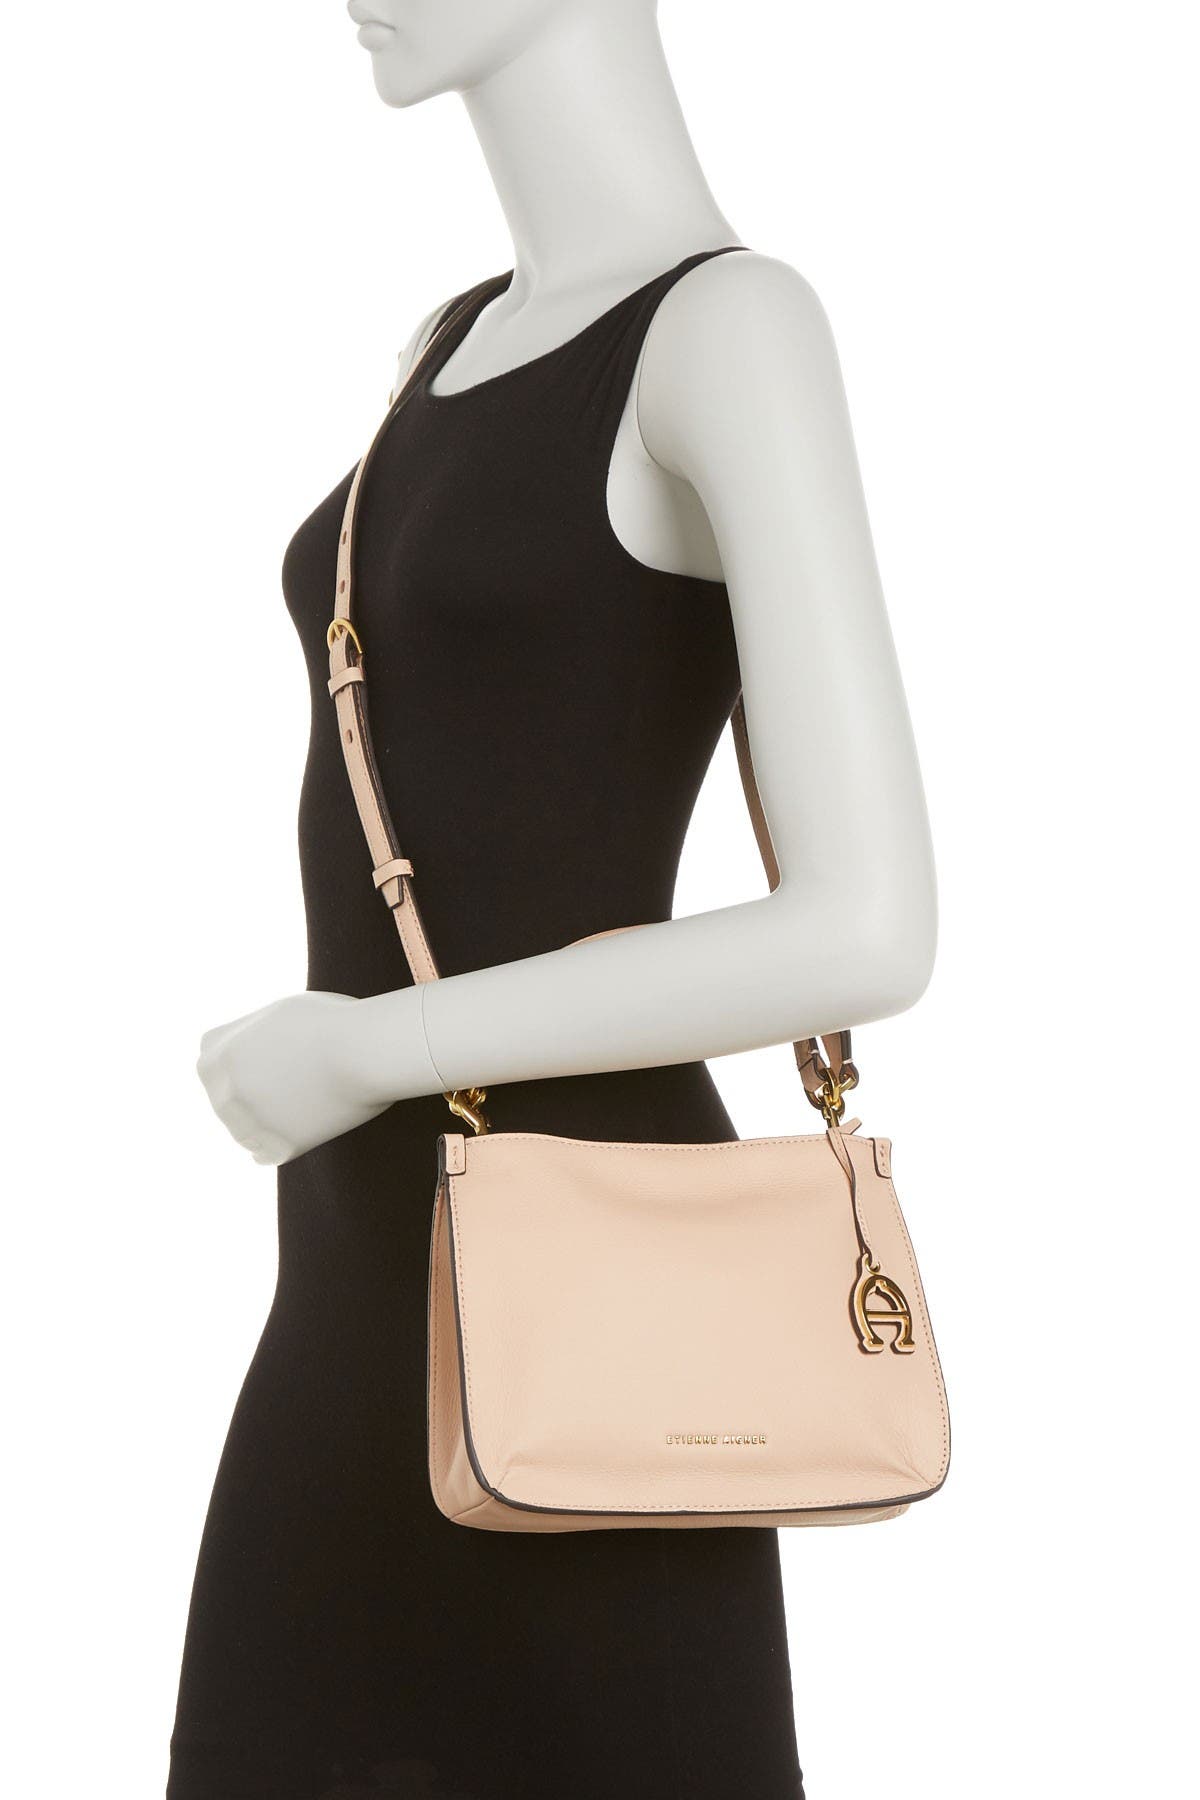 Etienne Aigner Alexandra Crossbody In Toasted Almond-letoa